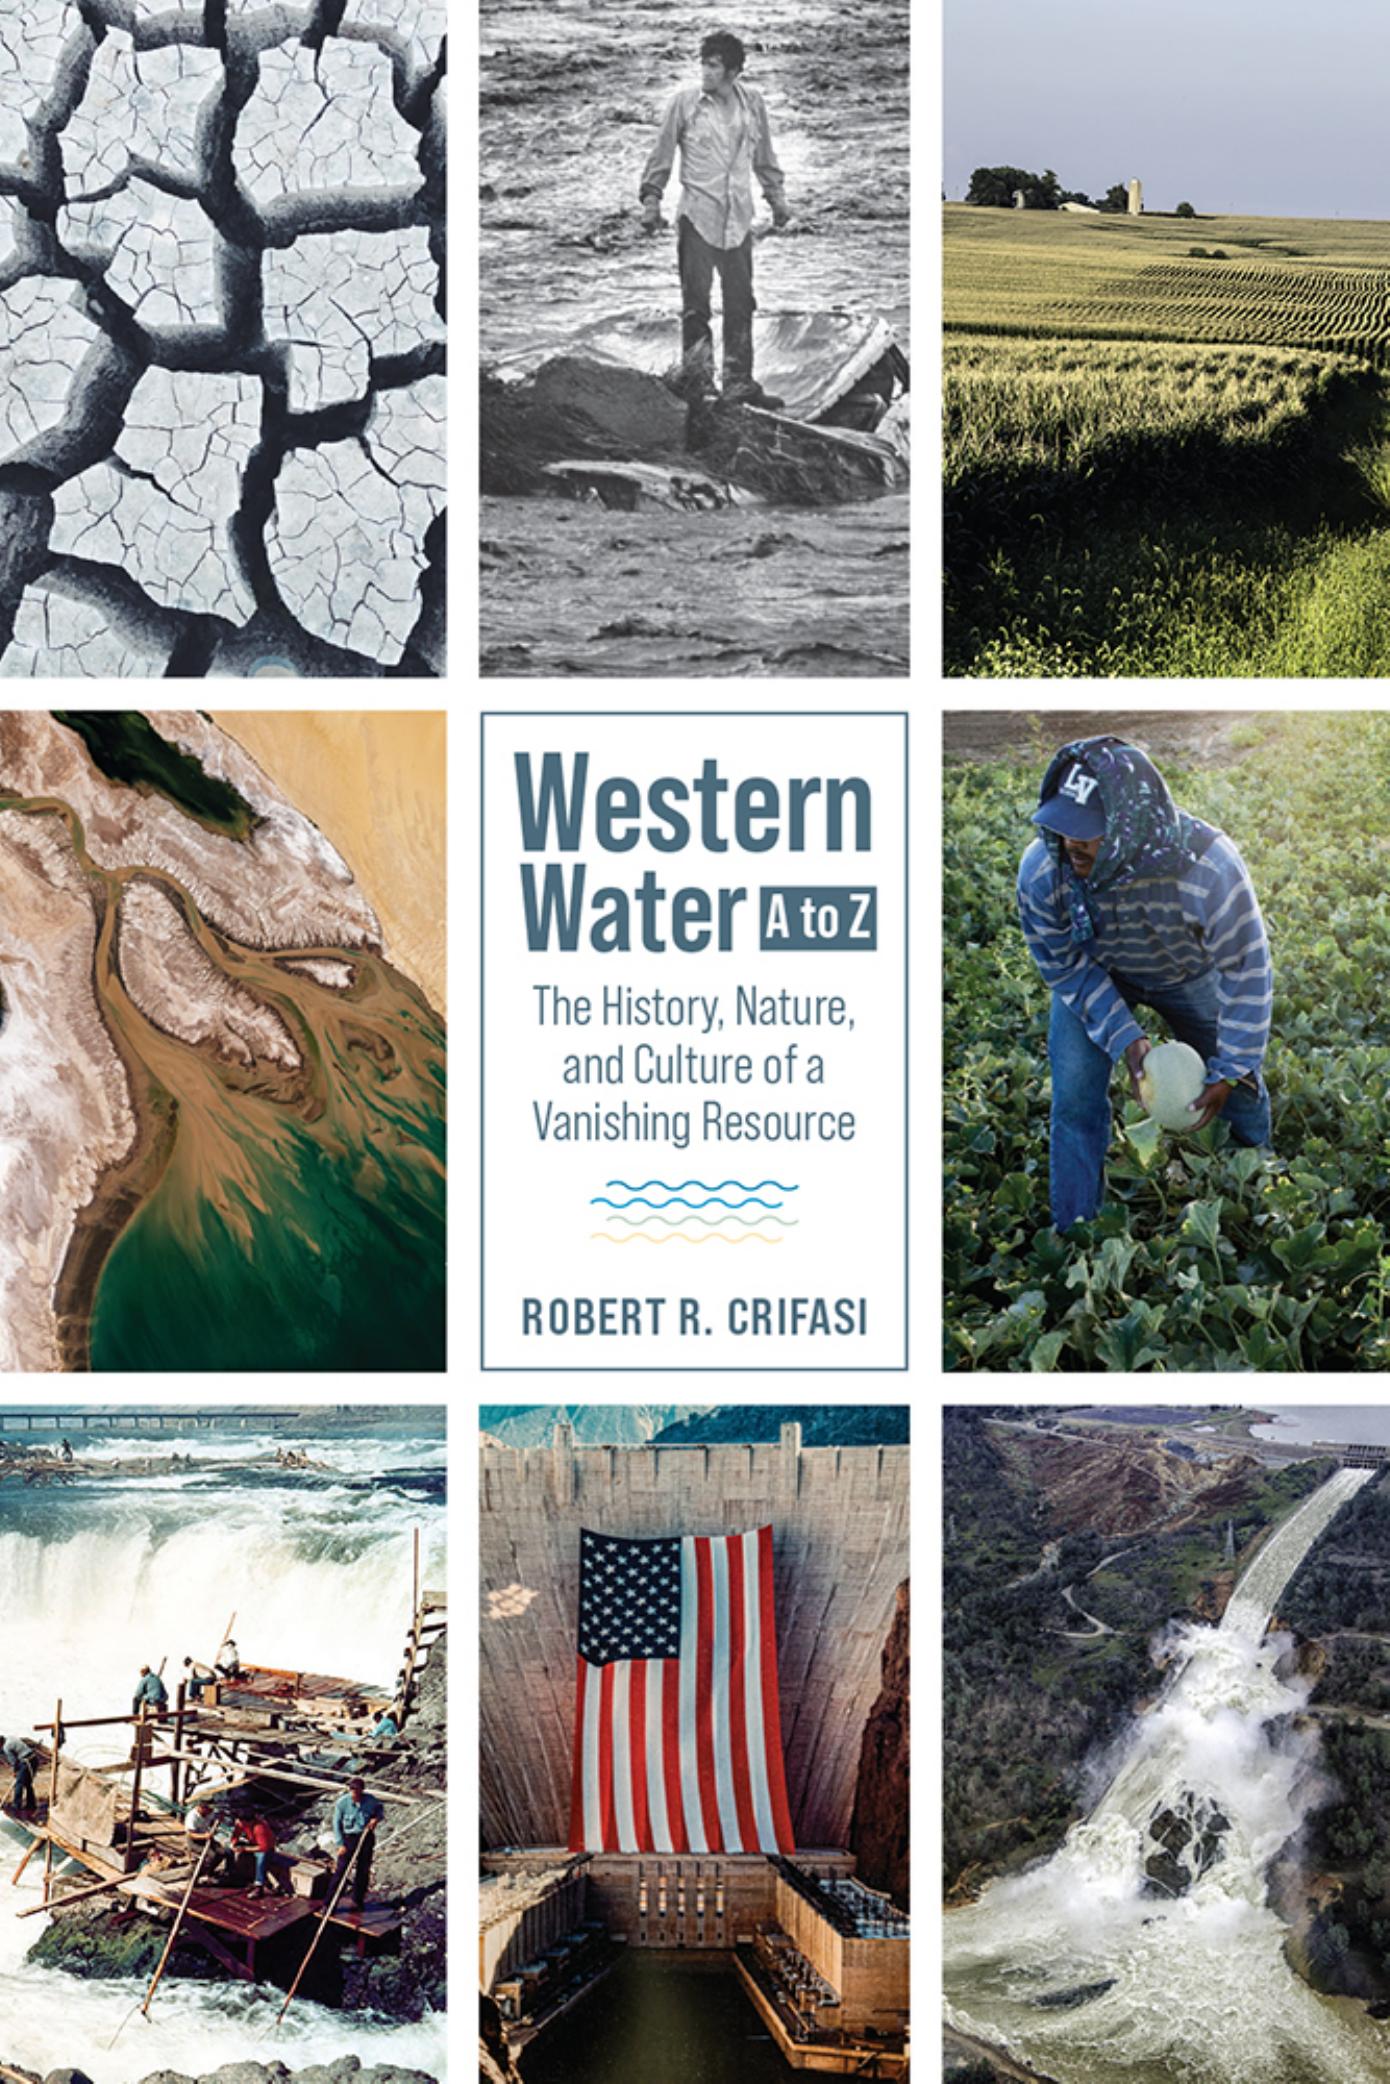 Western Water A to Z: The History, Nature, and Culture of a Vanishing Resource by Robert R Crifasi